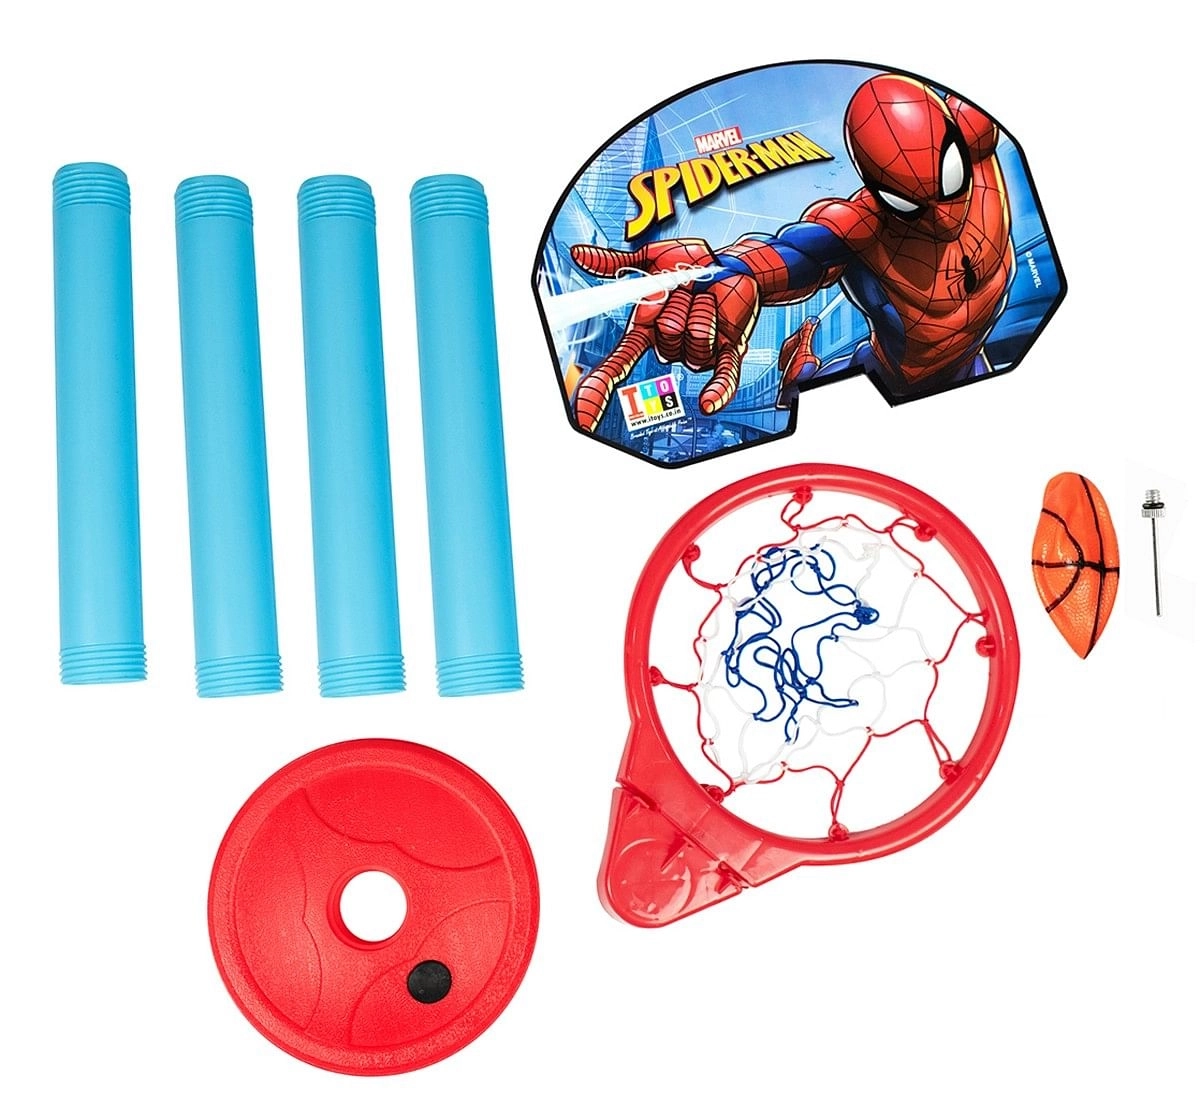 IToys Marvel Spiderman shooting champ basket ball set, standing basket ball for growing kids,  3Y+(Multicolour)